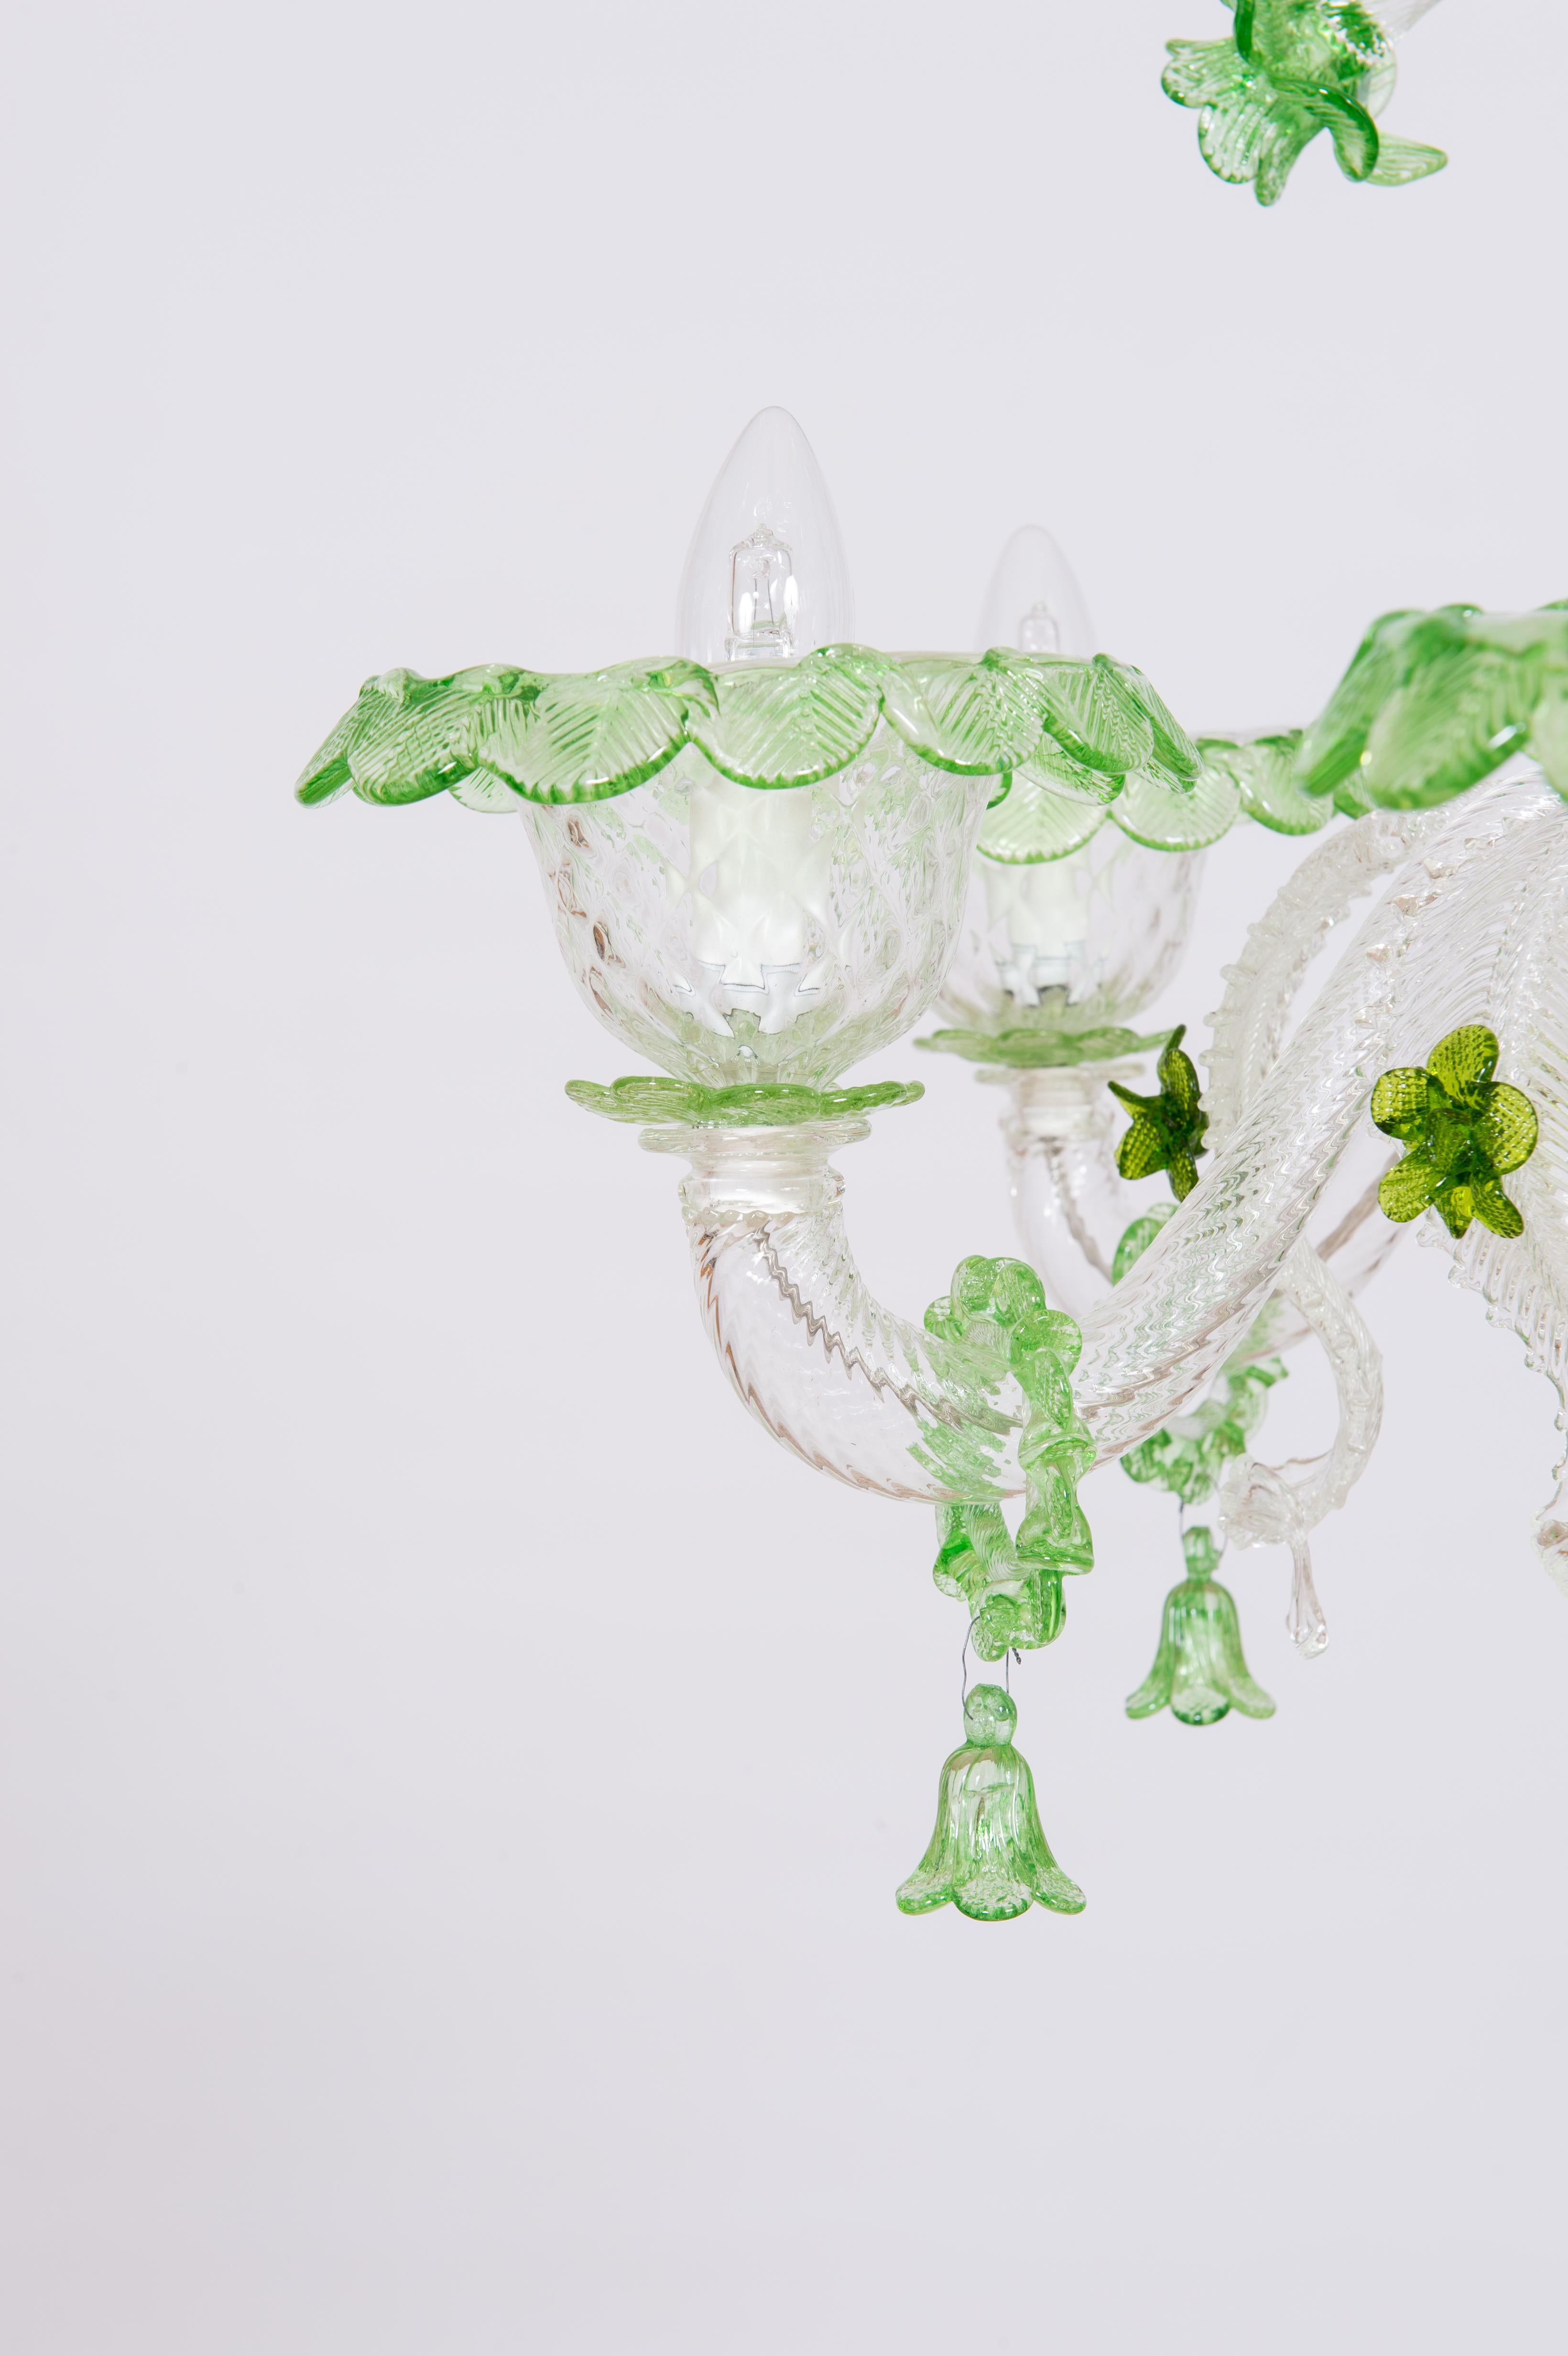 Hand-Crafted Bellflowers Rezzonico Chandelier in Green Murano Glass Venice Italy 21st century For Sale